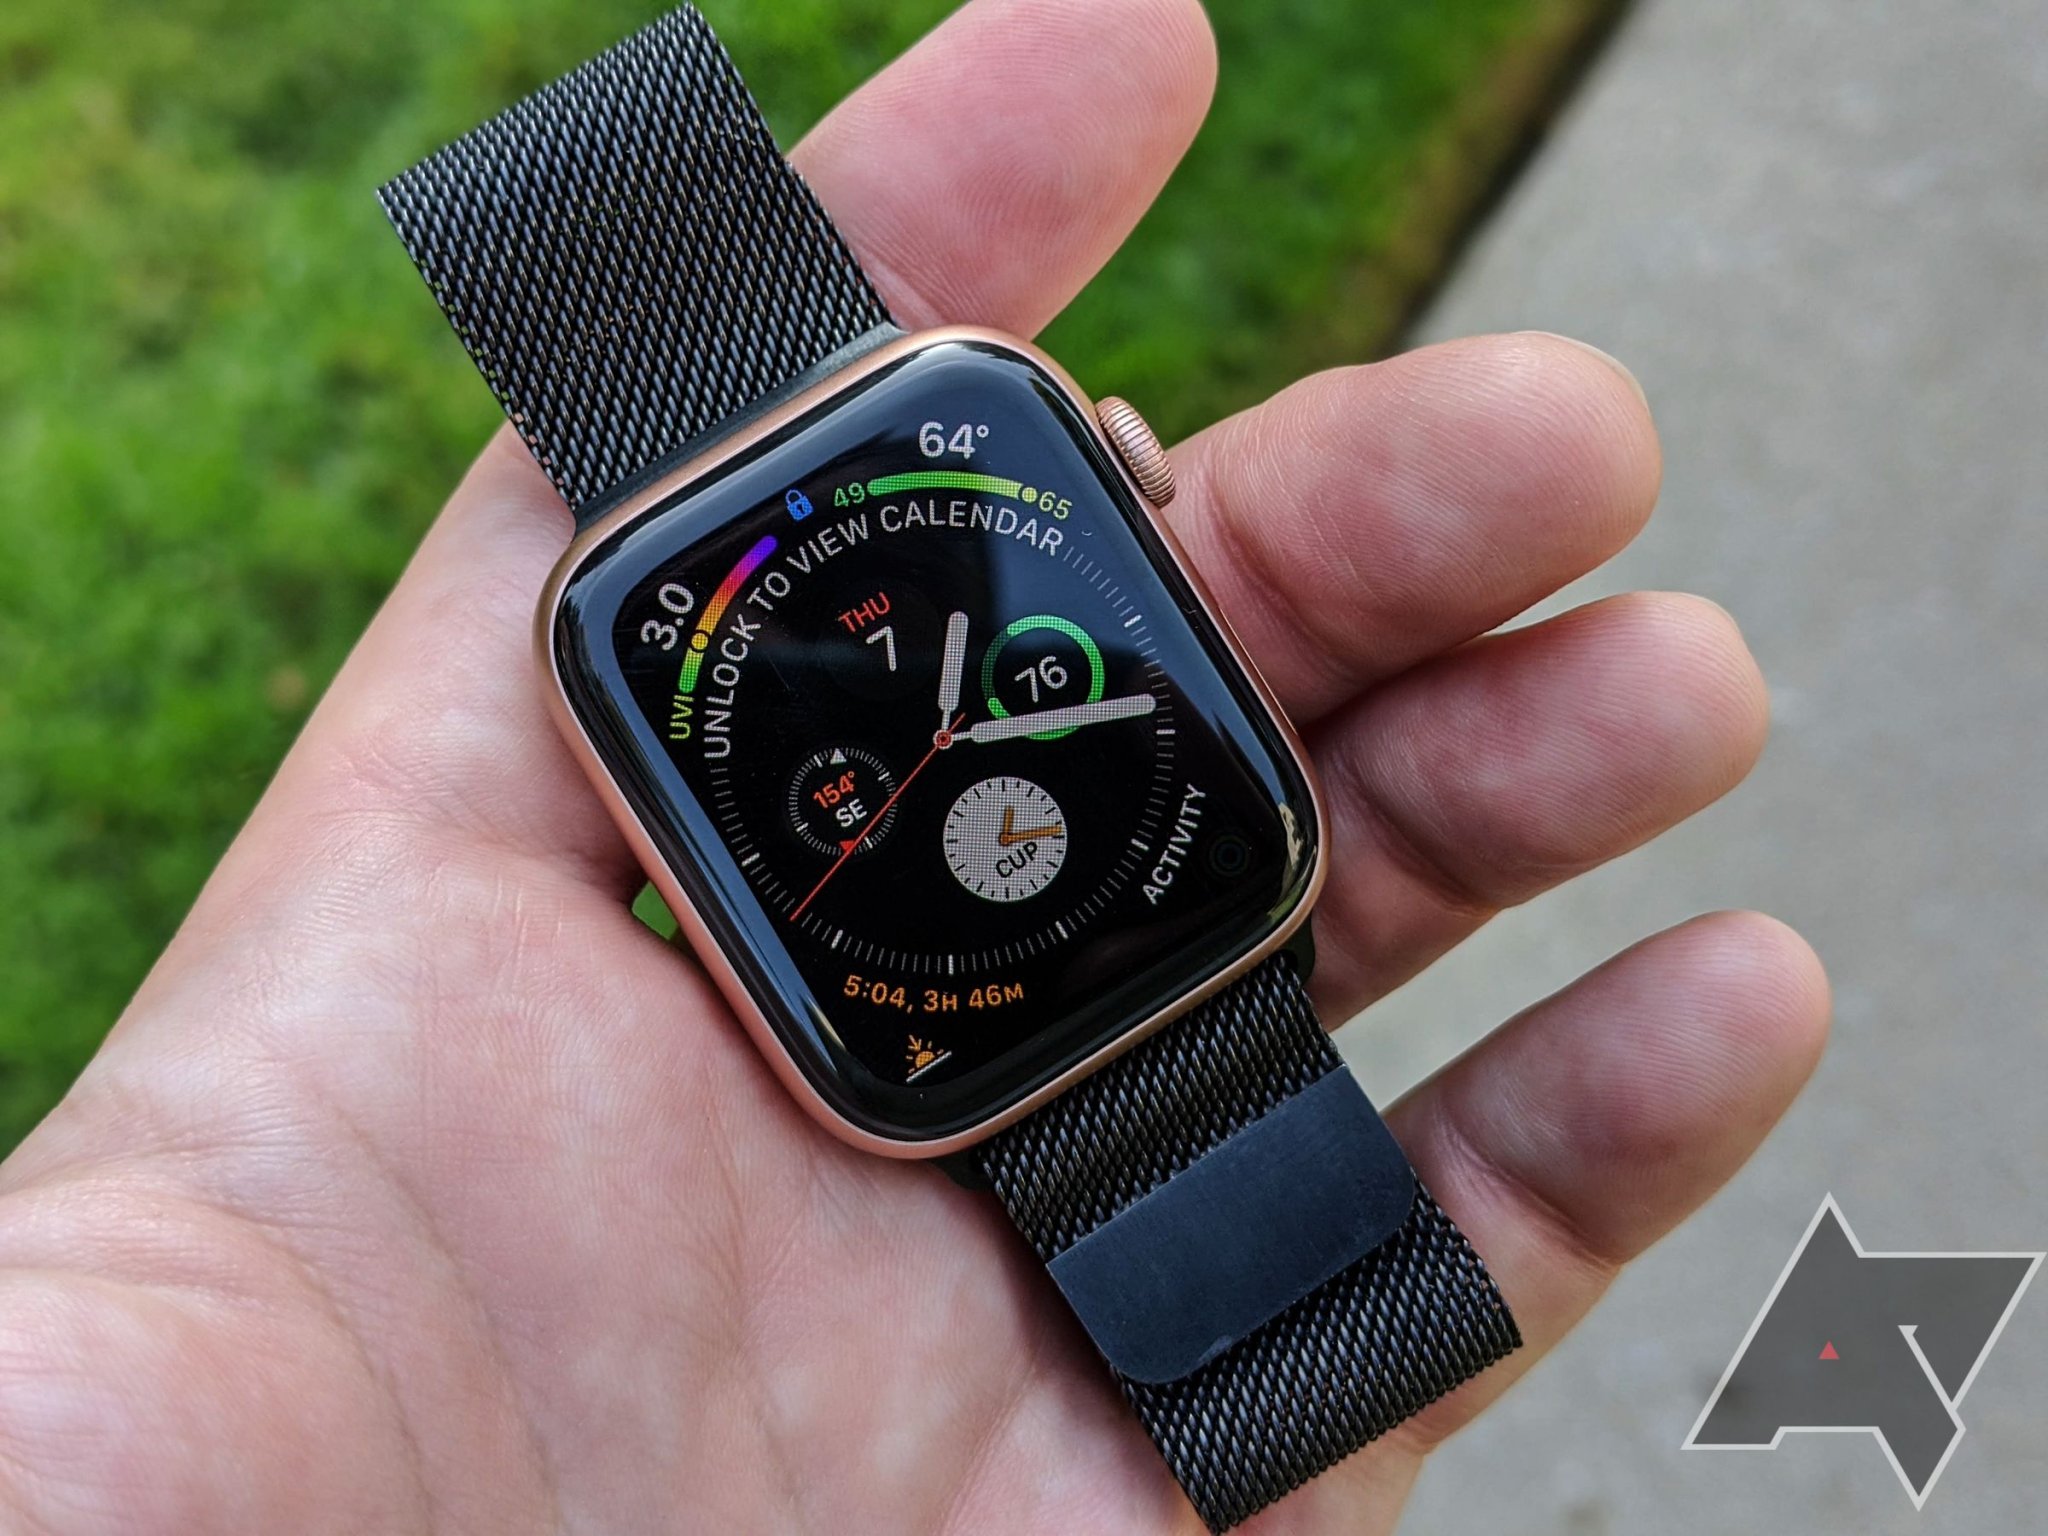 I'm an Android user who tried the Apple Watch for a month — it's now the only smartwatch I'll recommend